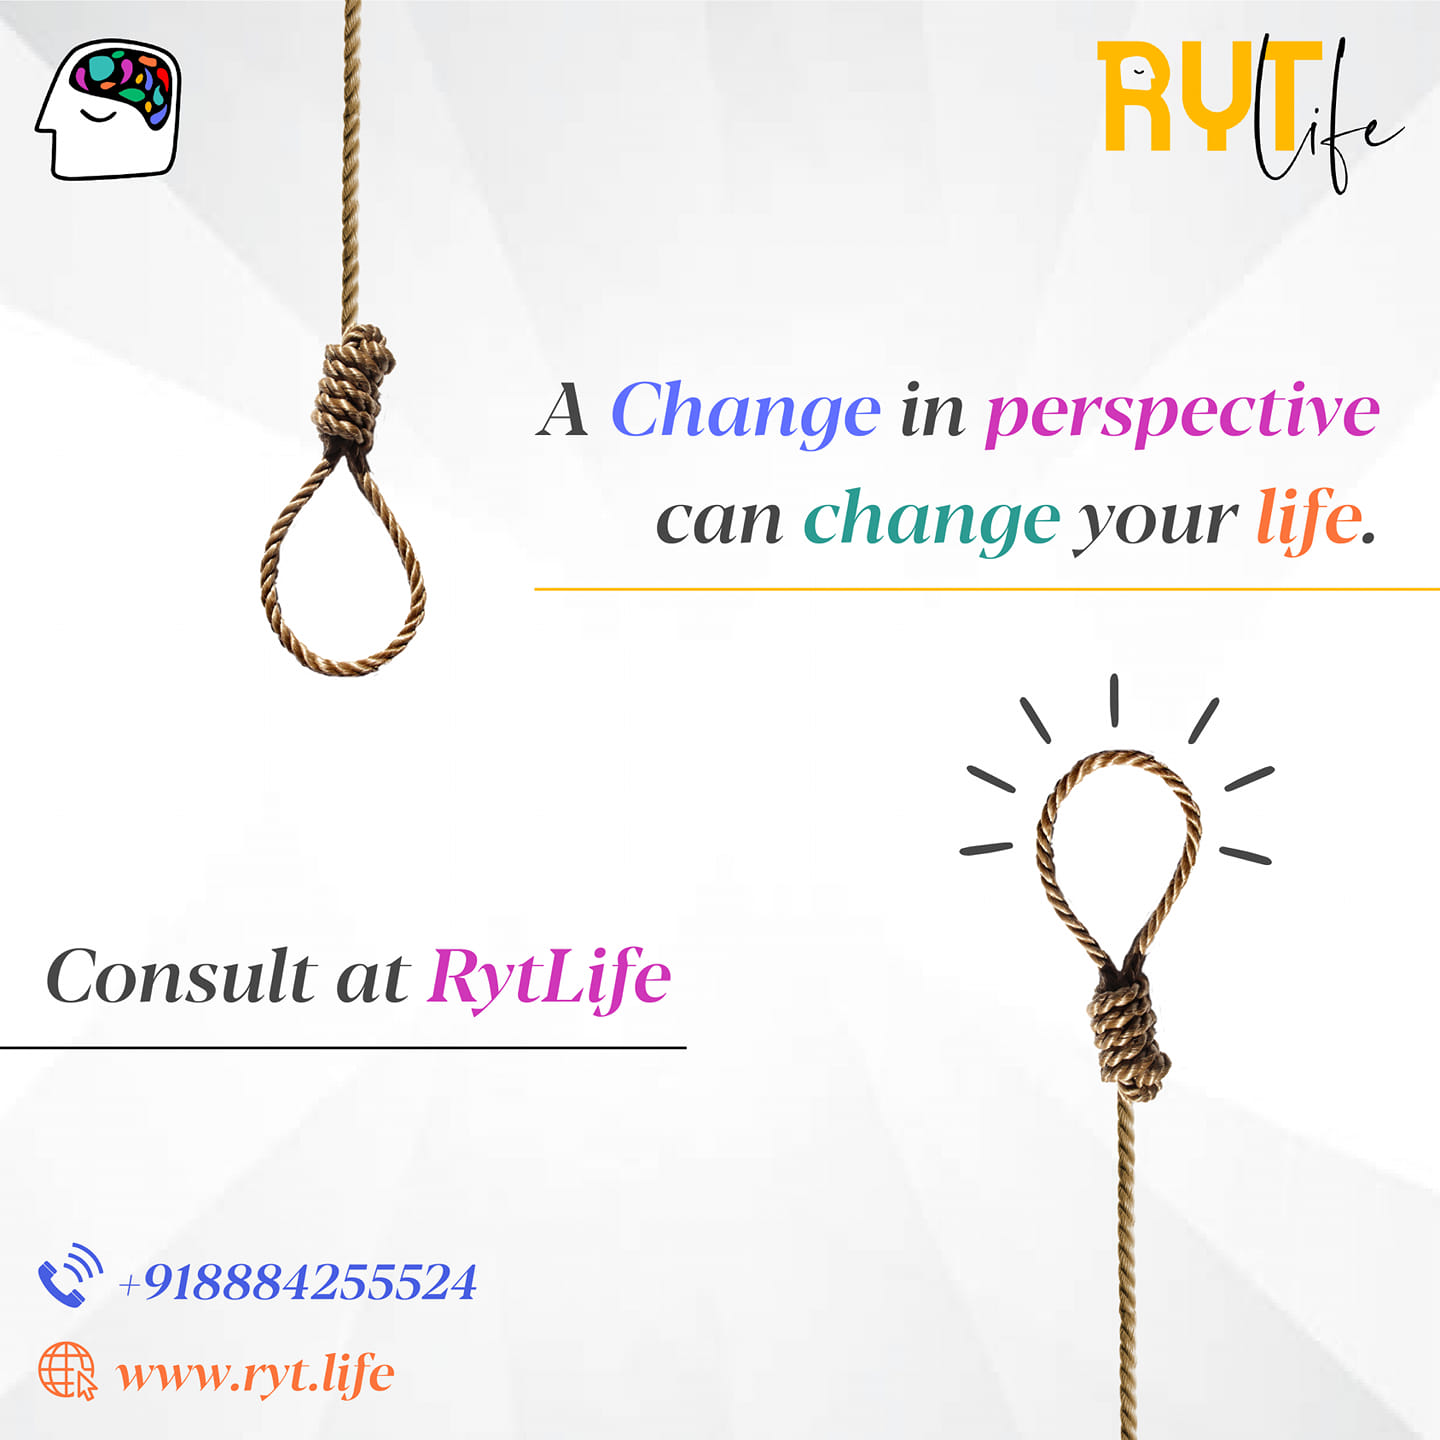 online mental health counseling india | Ryt Life